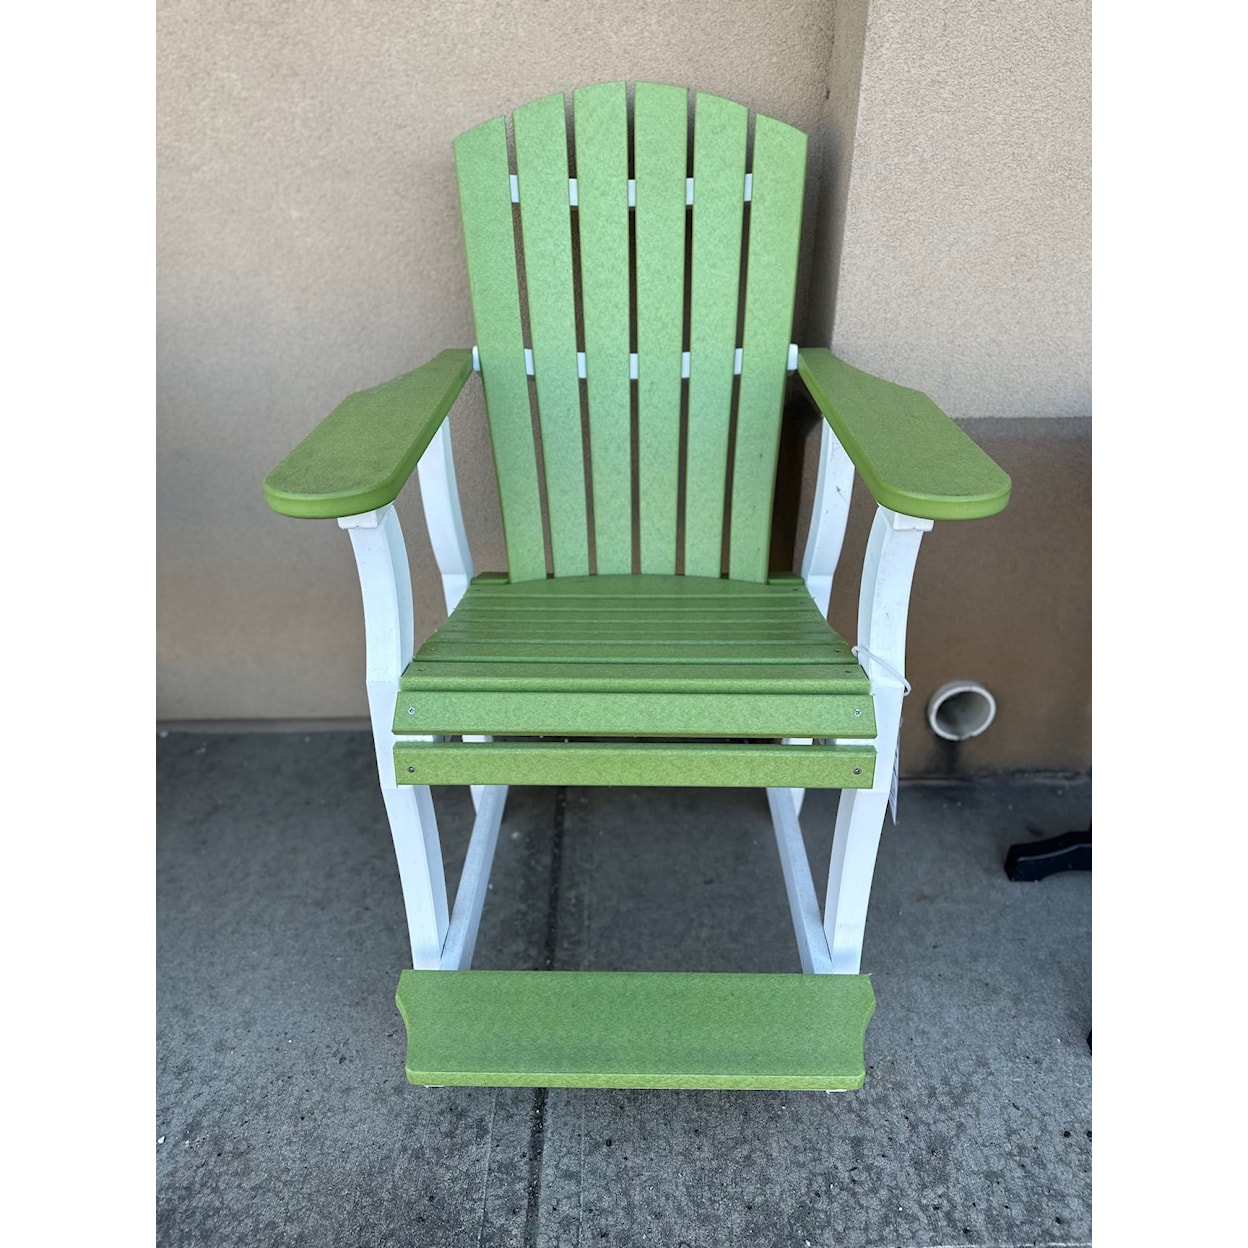 Hoosier Poly Products Counter Height Outdoor Chairs Outdoor Counter Height Chair